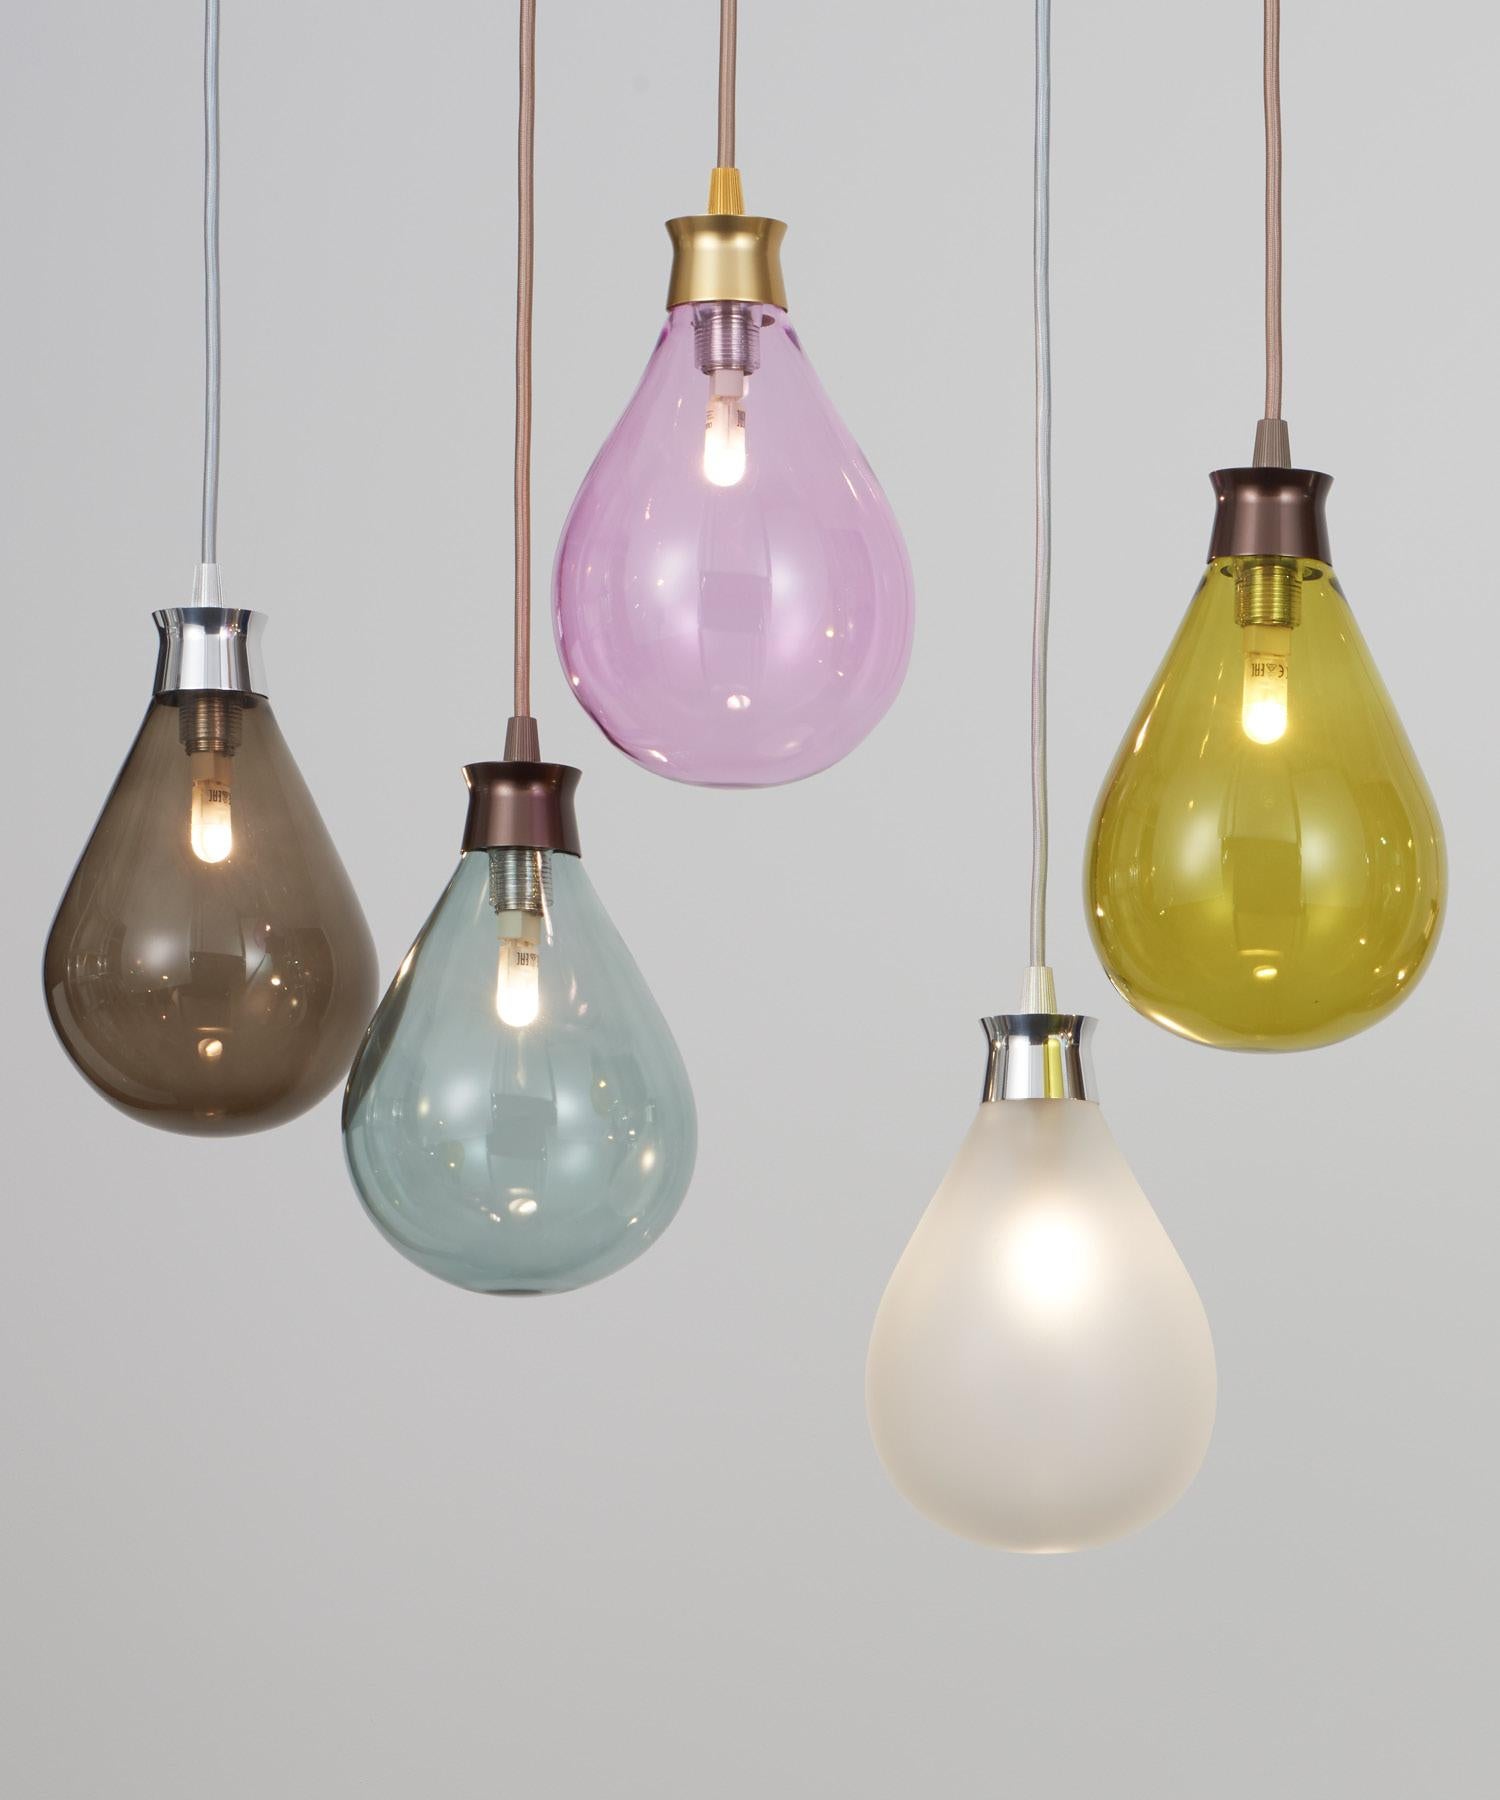 Cintola Pendant in Polished Aluminium with Frosted Handblown Glass Globe For Sale 1